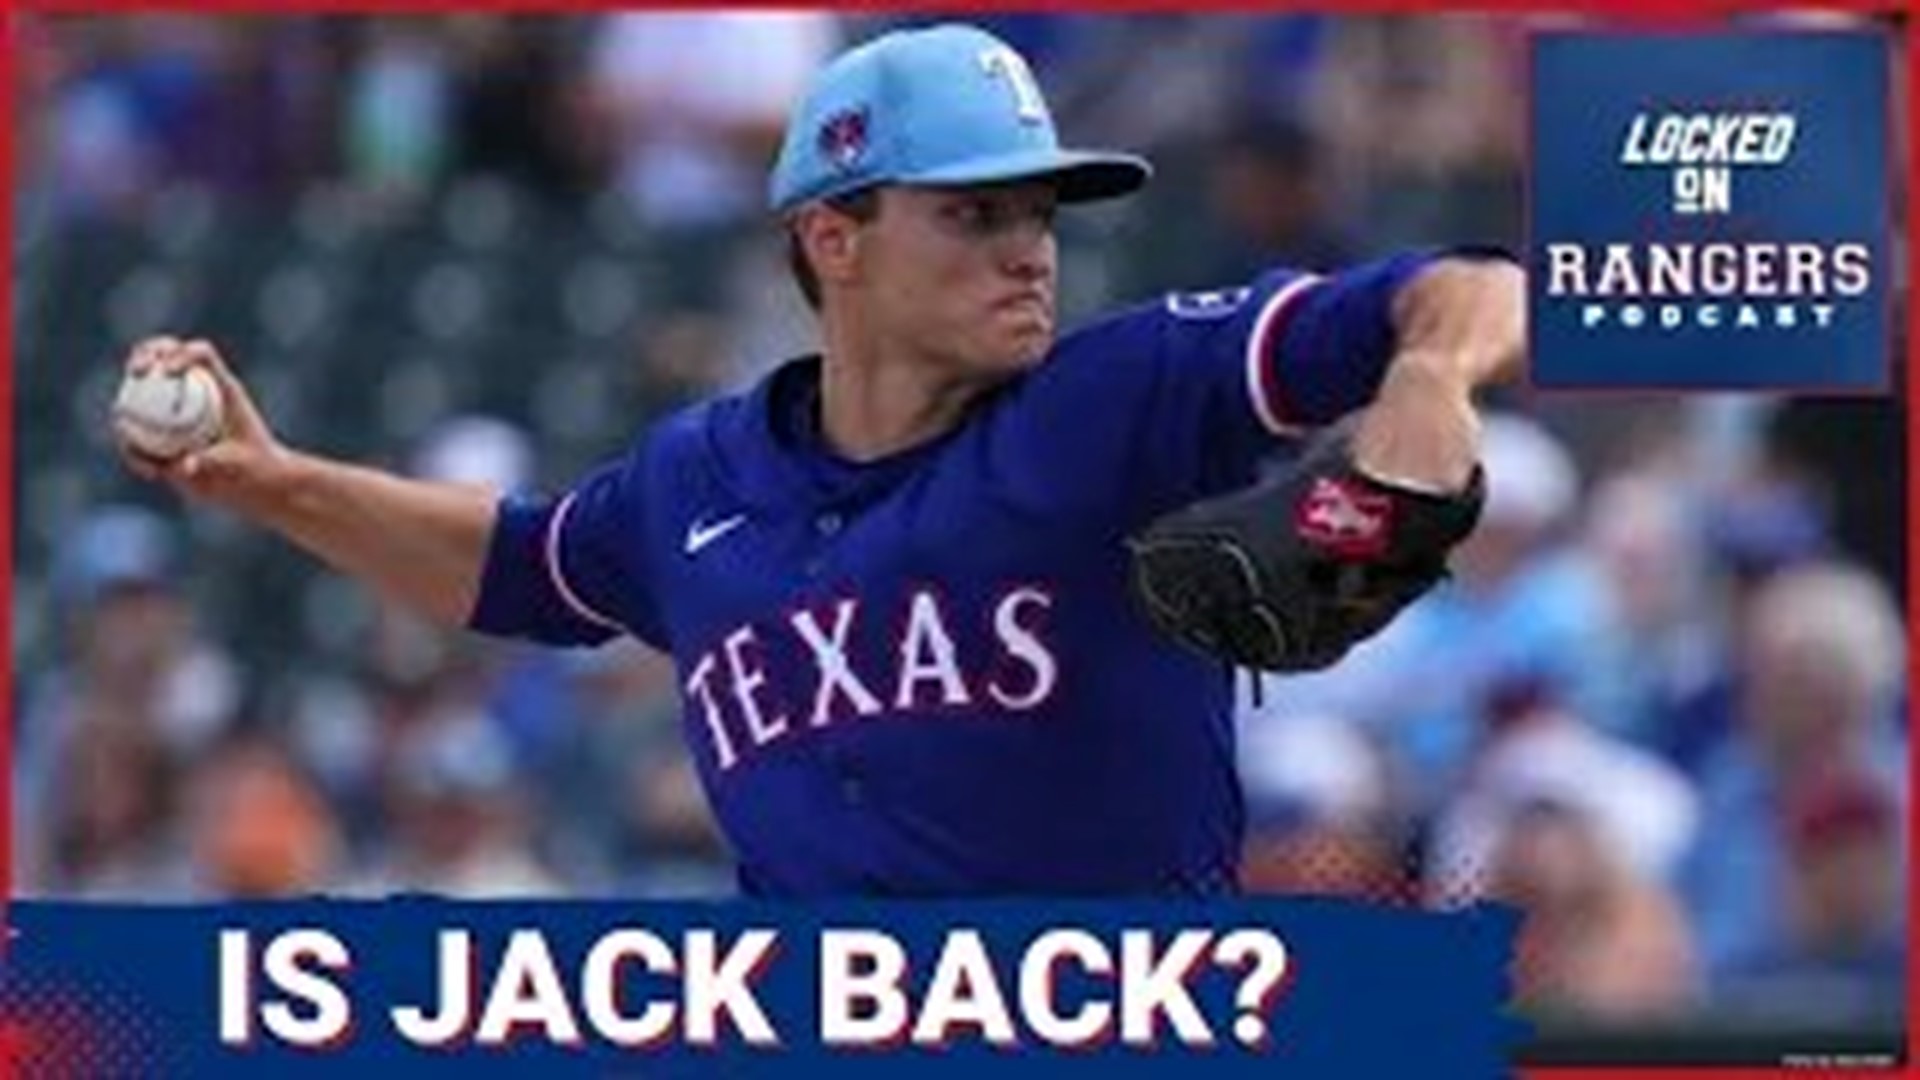 Texas Rangers prospect Jack Leiter had a great first outing after a fantastic spring, but does it mean he's back on track? Sebastian Walcott had a breakout 2023.